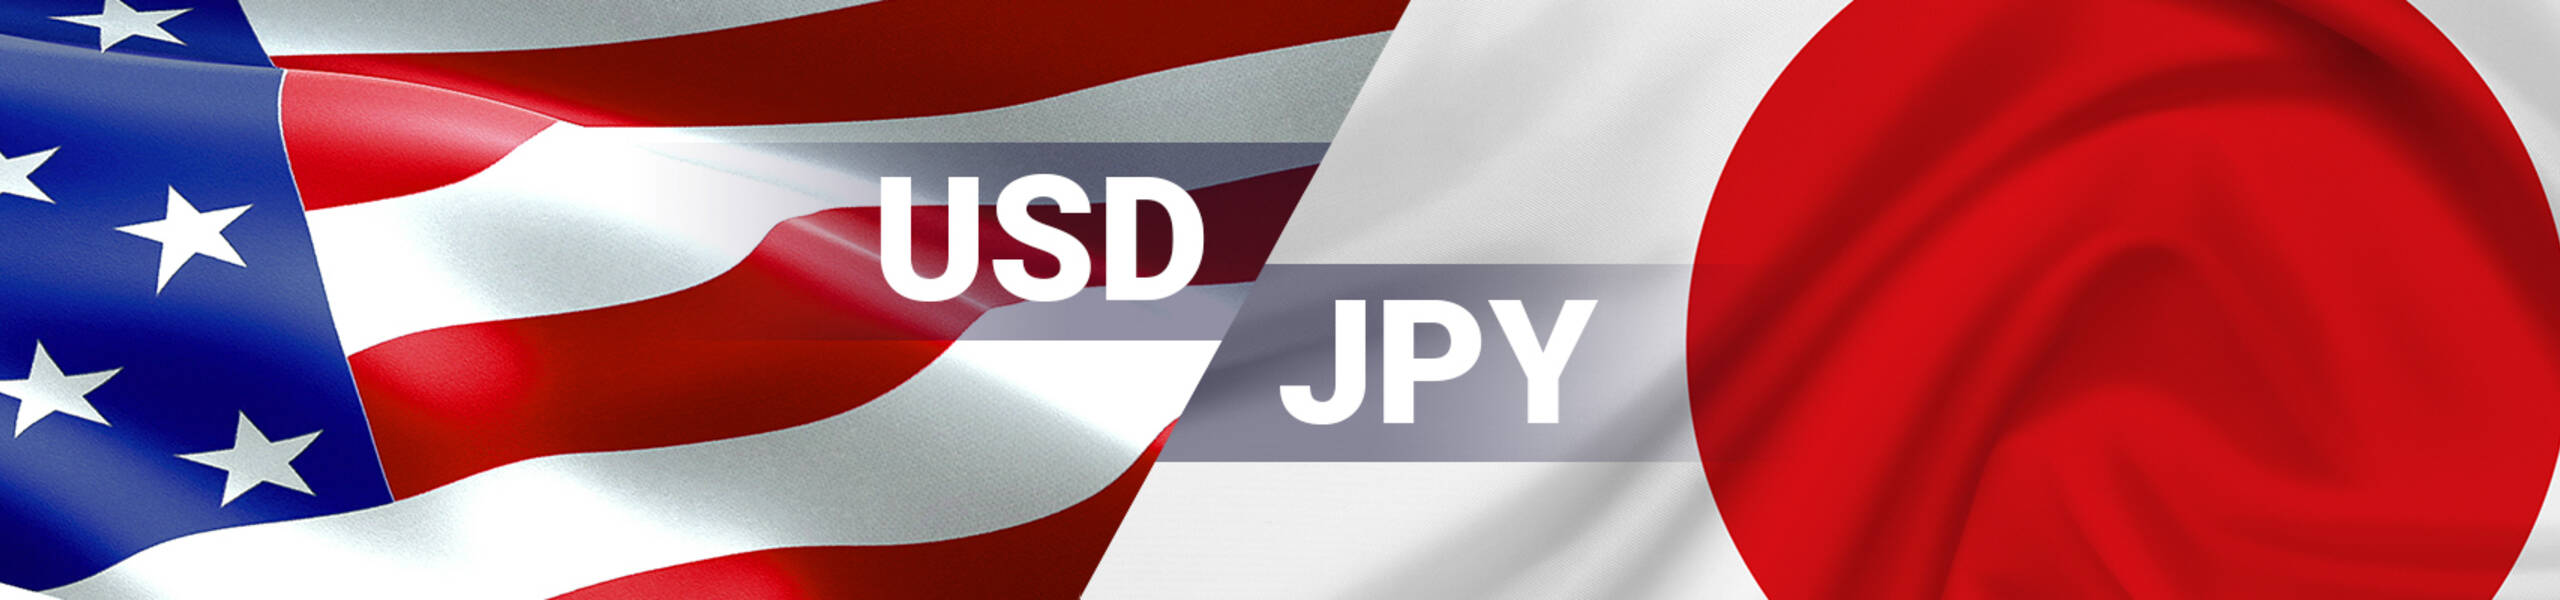 USD/JPY: the Dollar reached main daily resistance